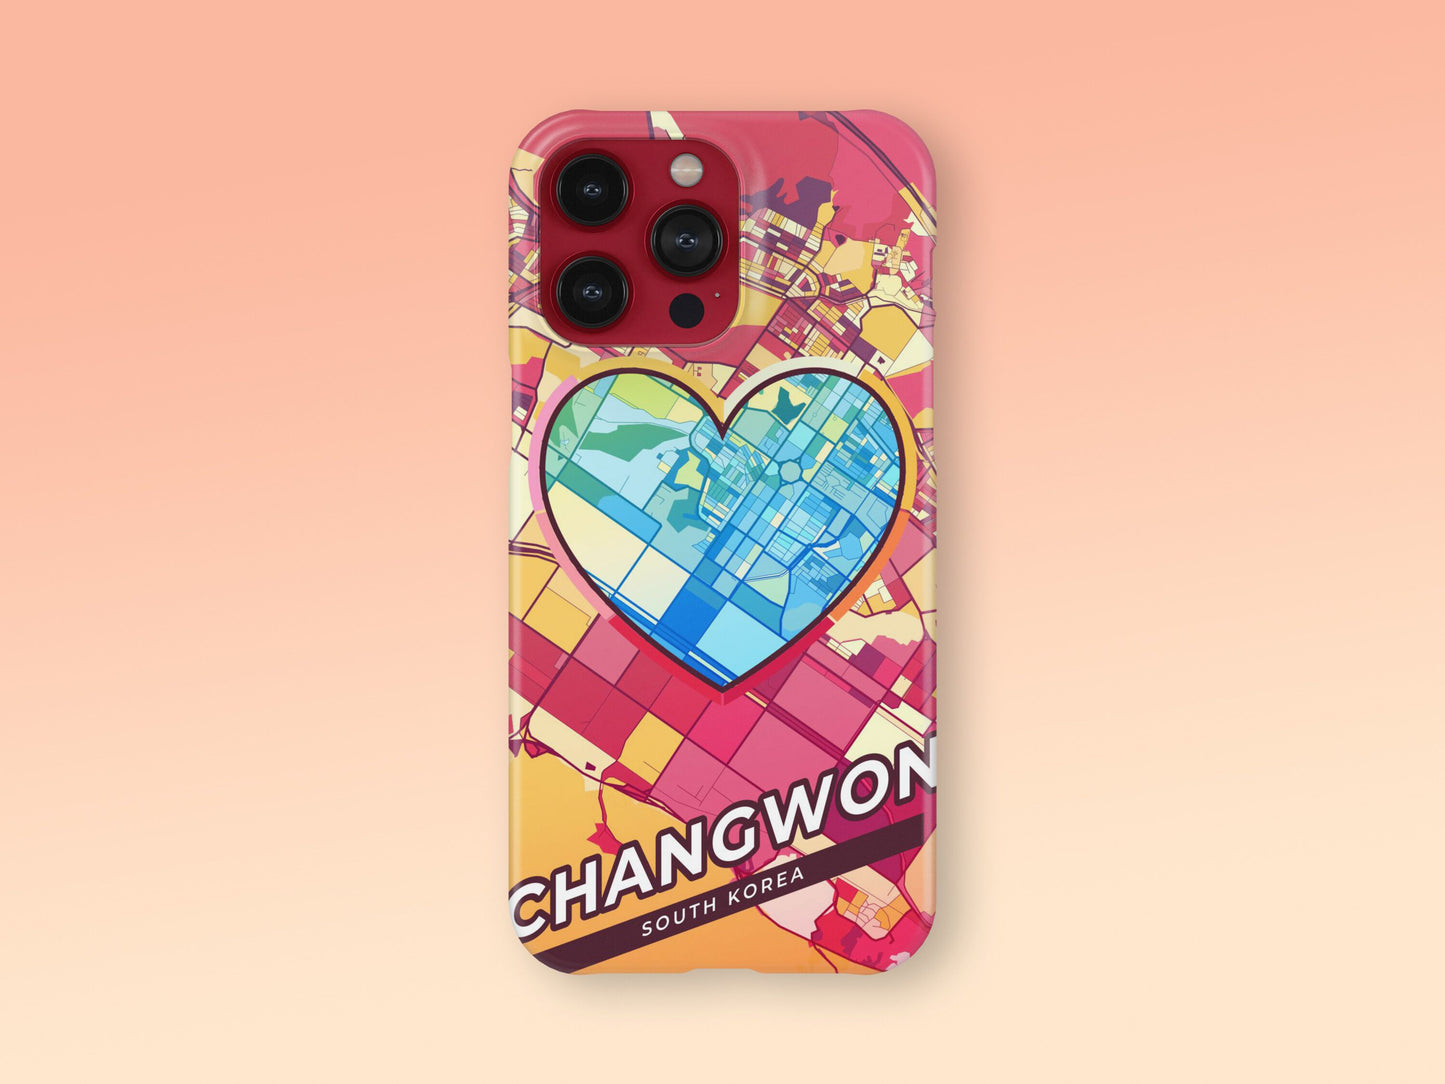 Changwon South Korea slim phone case with colorful icon. Birthday, wedding or housewarming gift. Couple match cases. 2